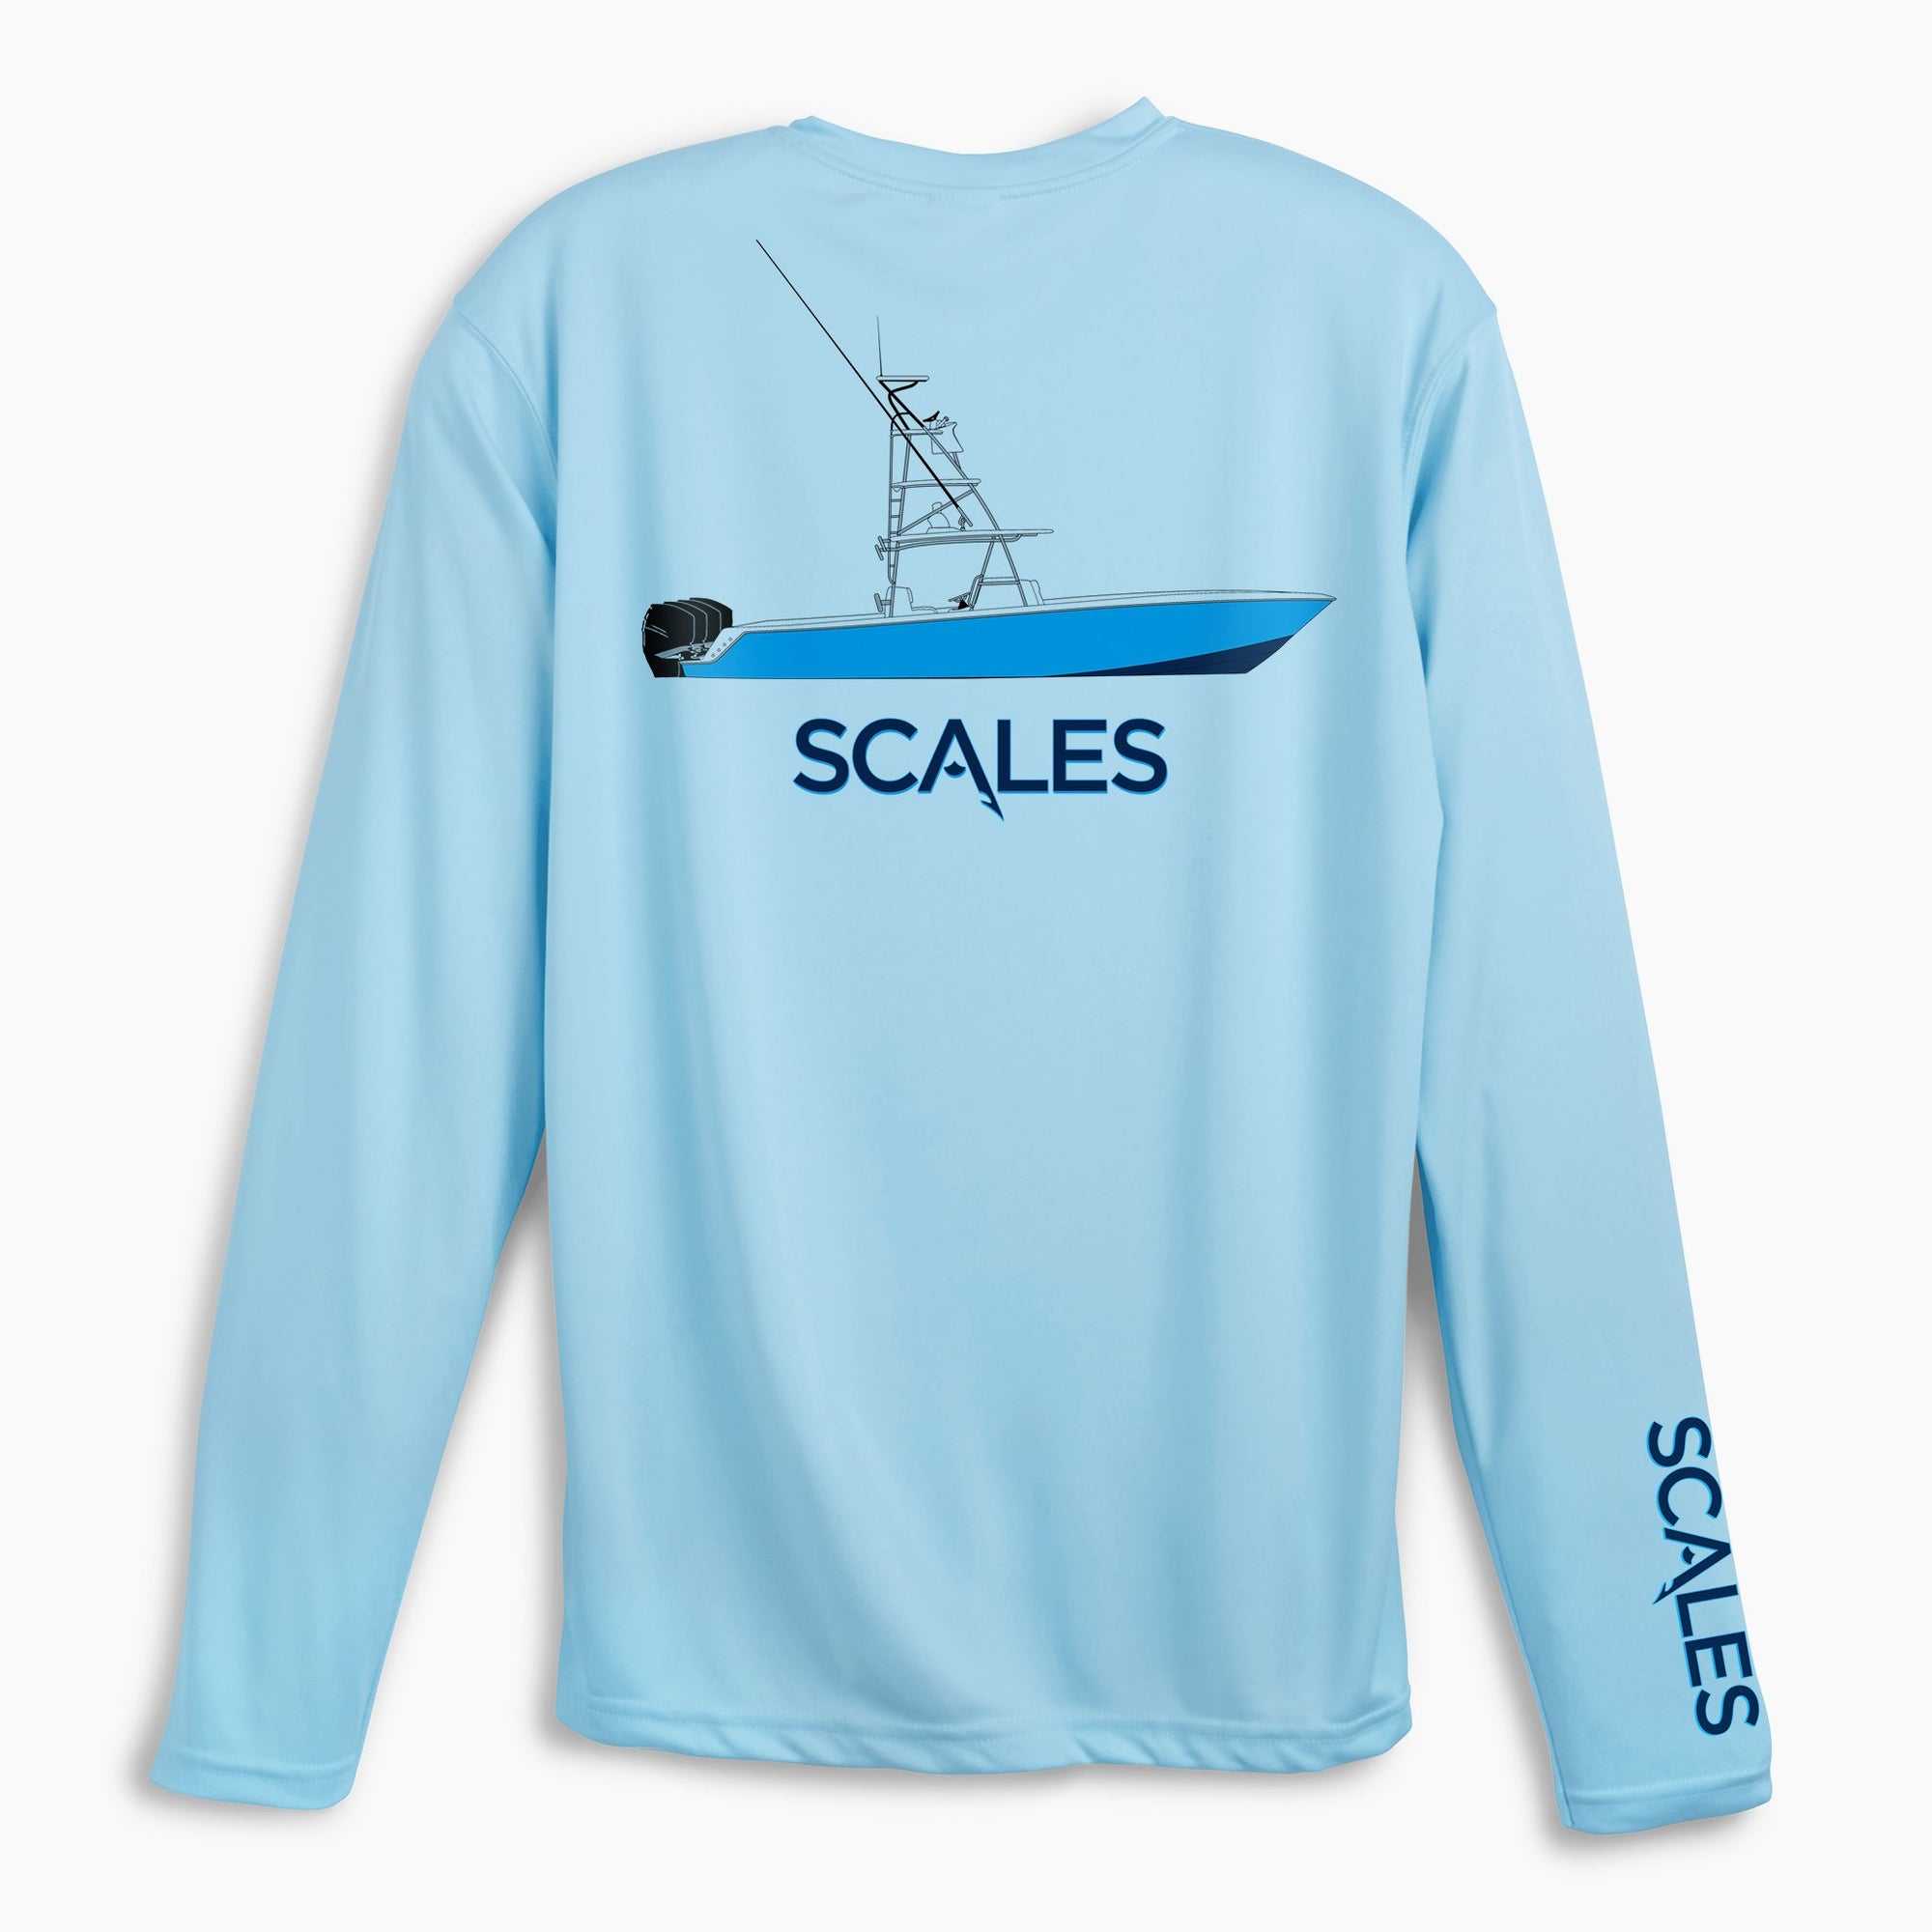 Scales Gear Pro Performance Team Scales Crew Light Blue Shirt